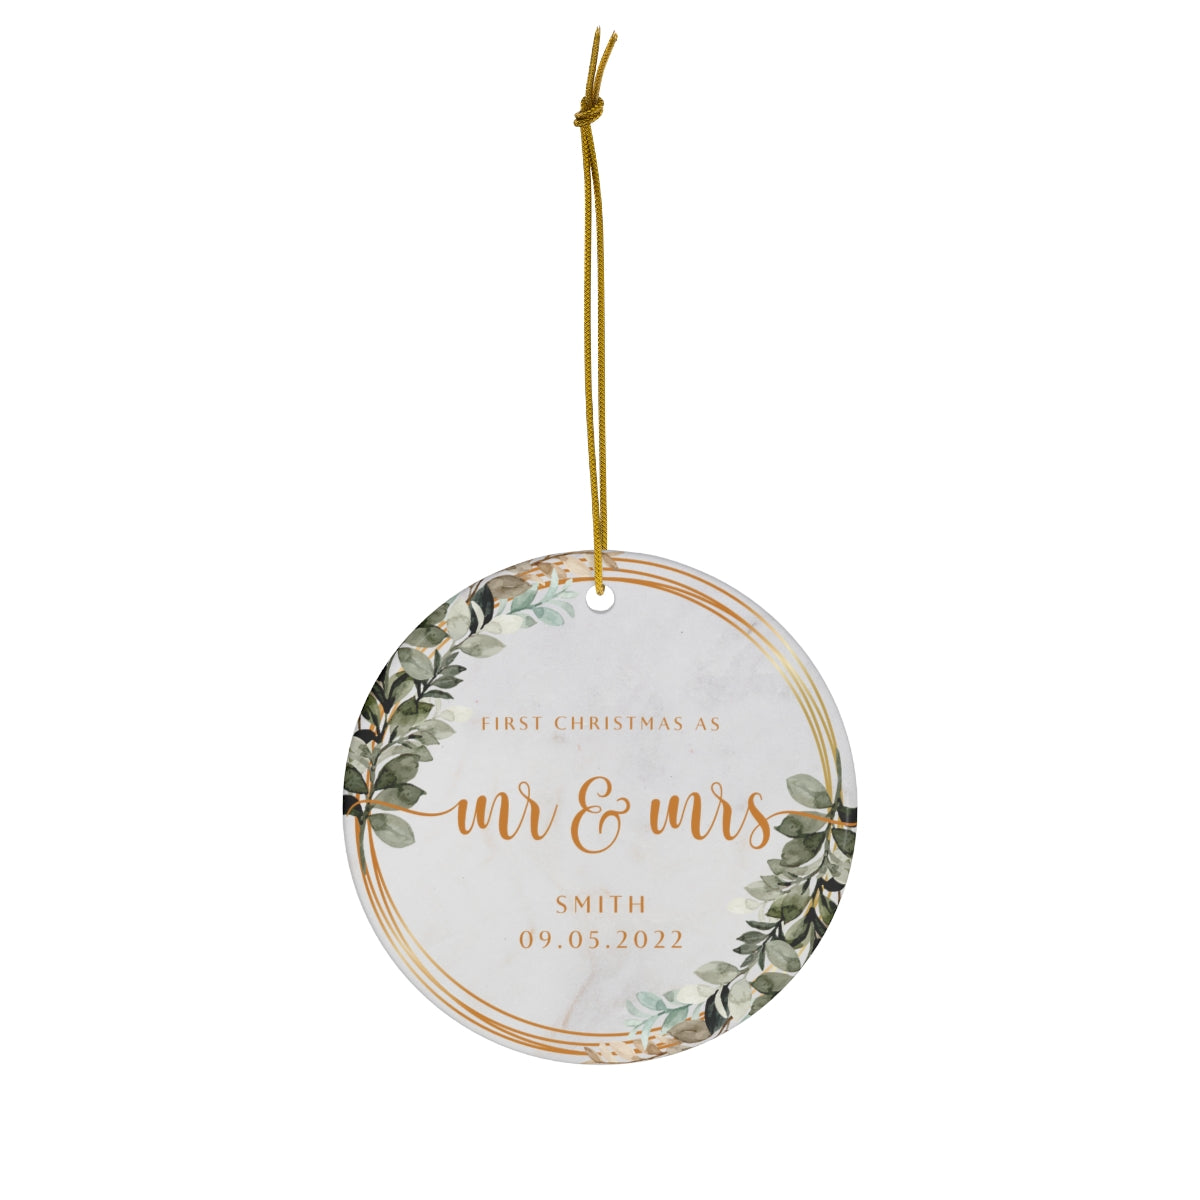 Mr and Mrs Christmas Ornament - First Christmas Married Ornament - Our First Christmas Married as Mr and Mrs Ornament - Floral Border Ornament - Personalized